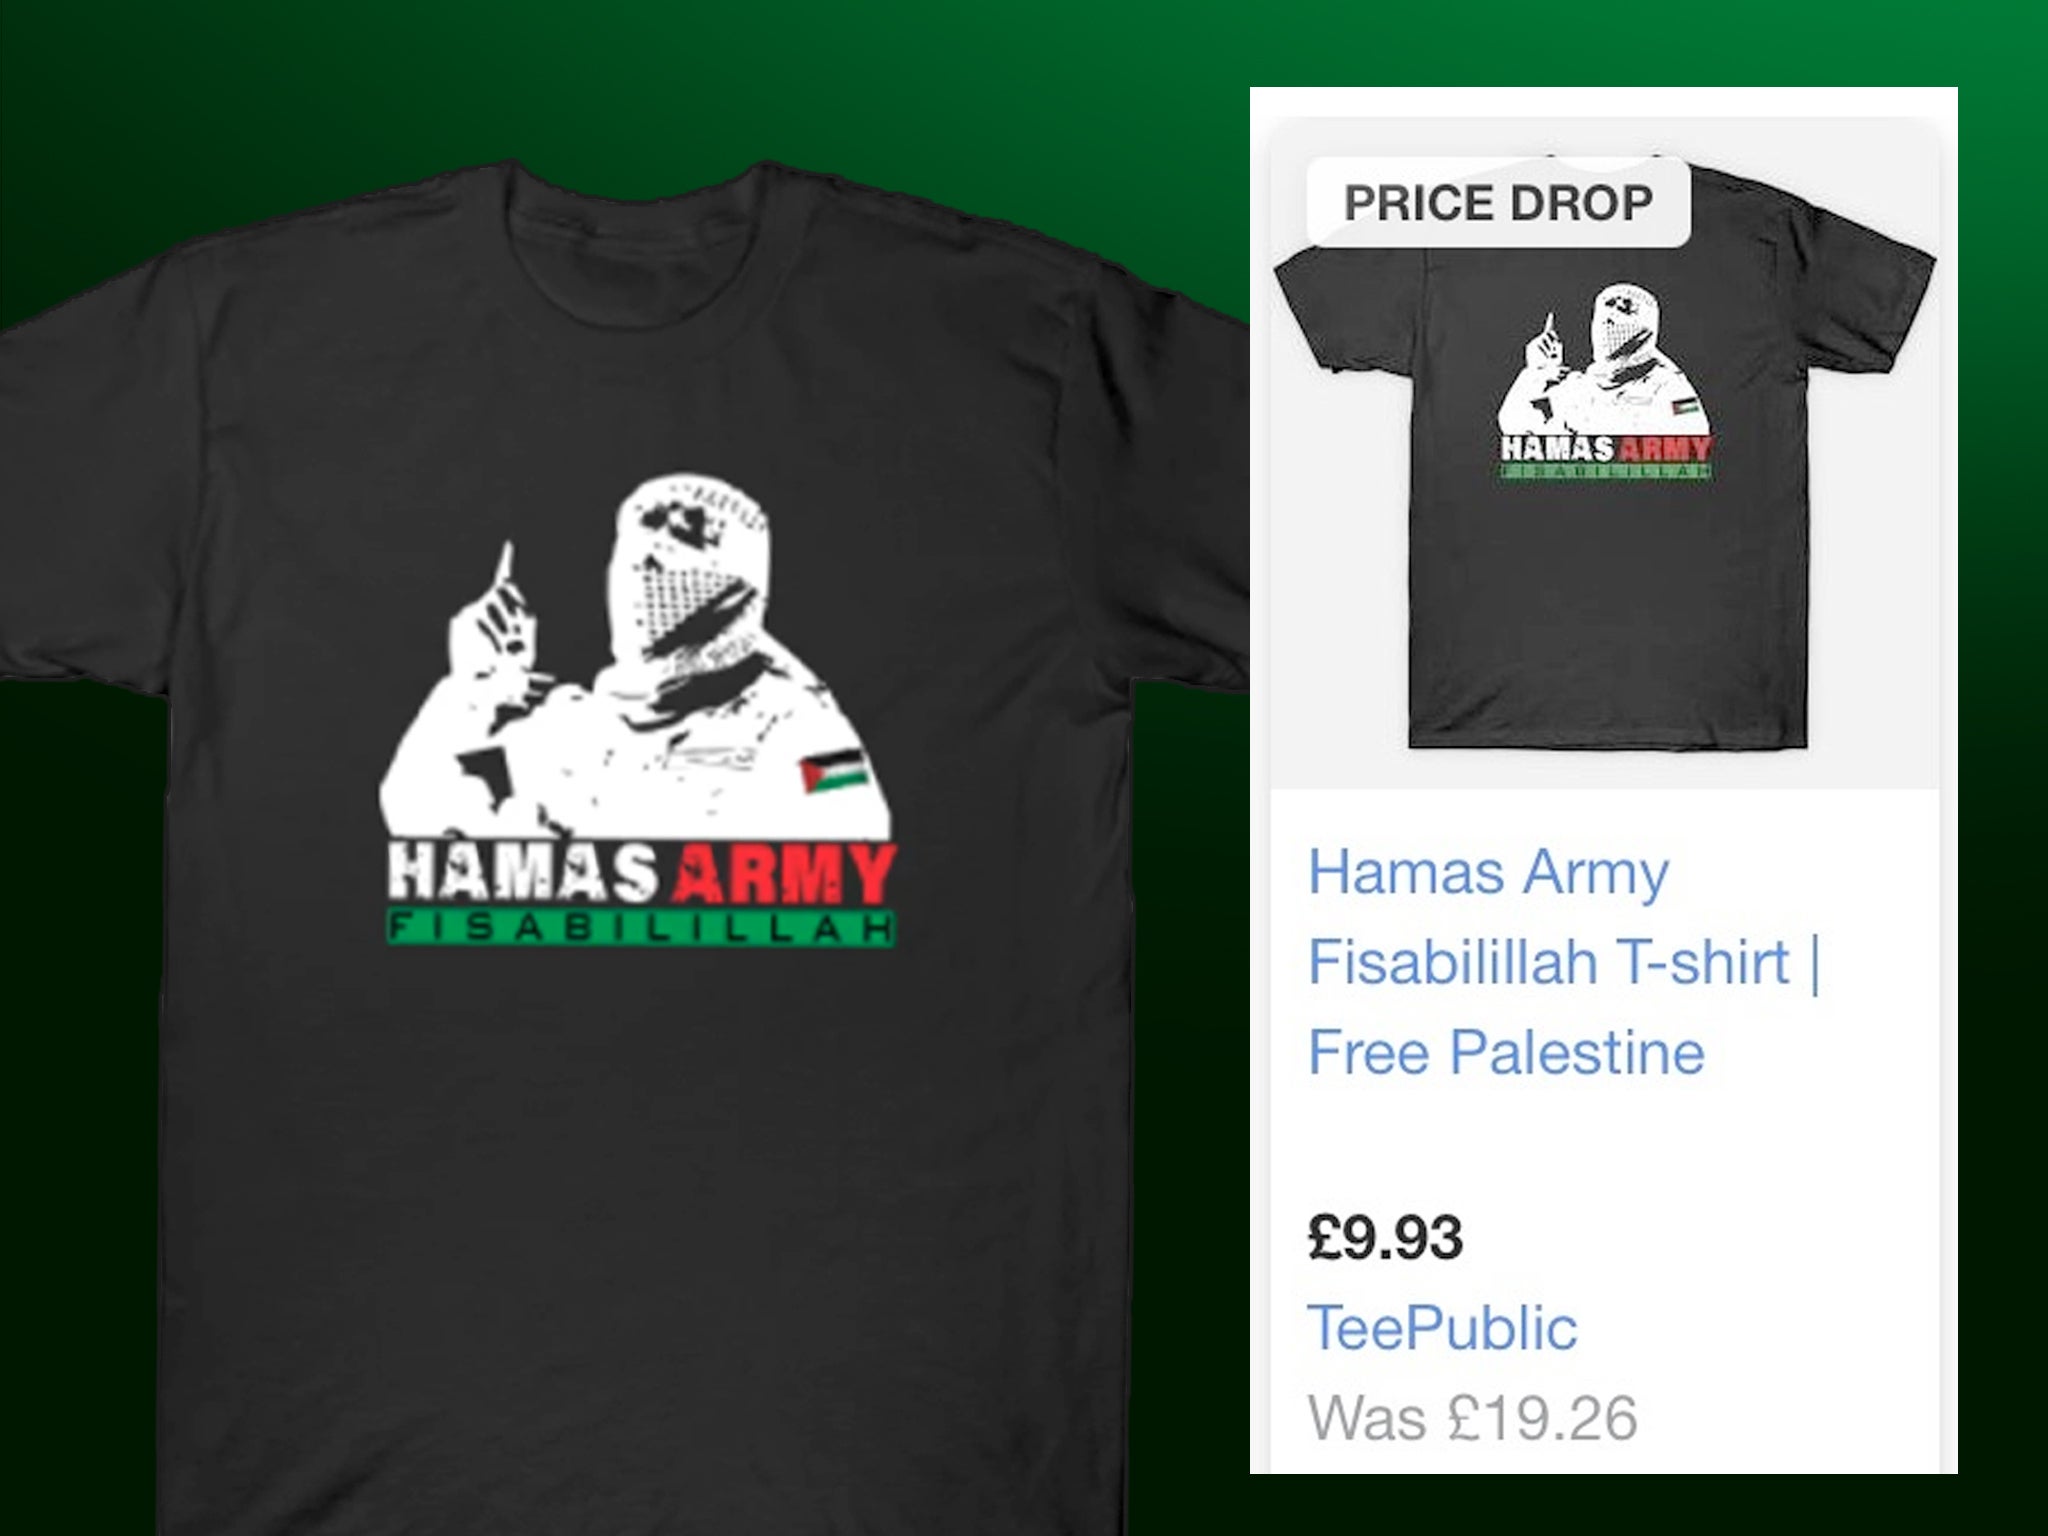 ‘Price drop’: how one T-shirt glorifying Hamas was advertised by Google (inset, right)